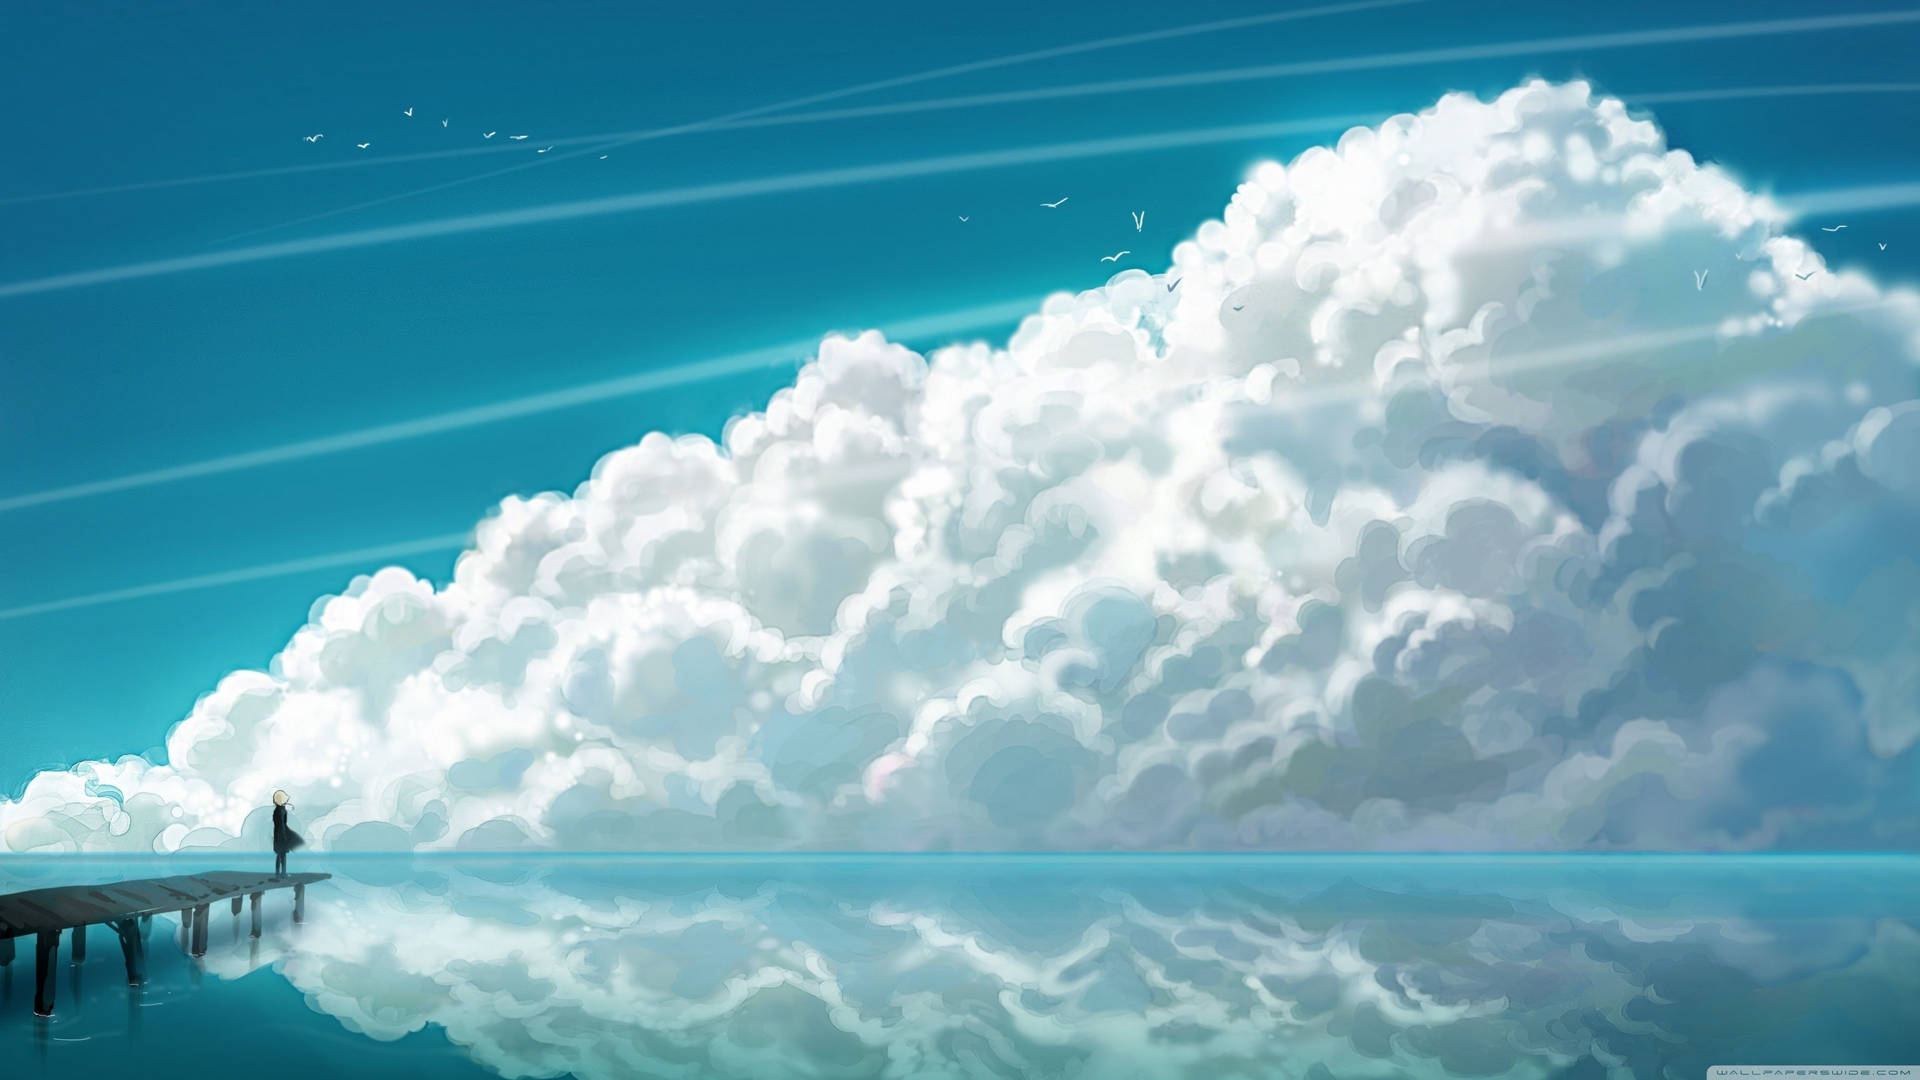 Hd Ocean And Clouds